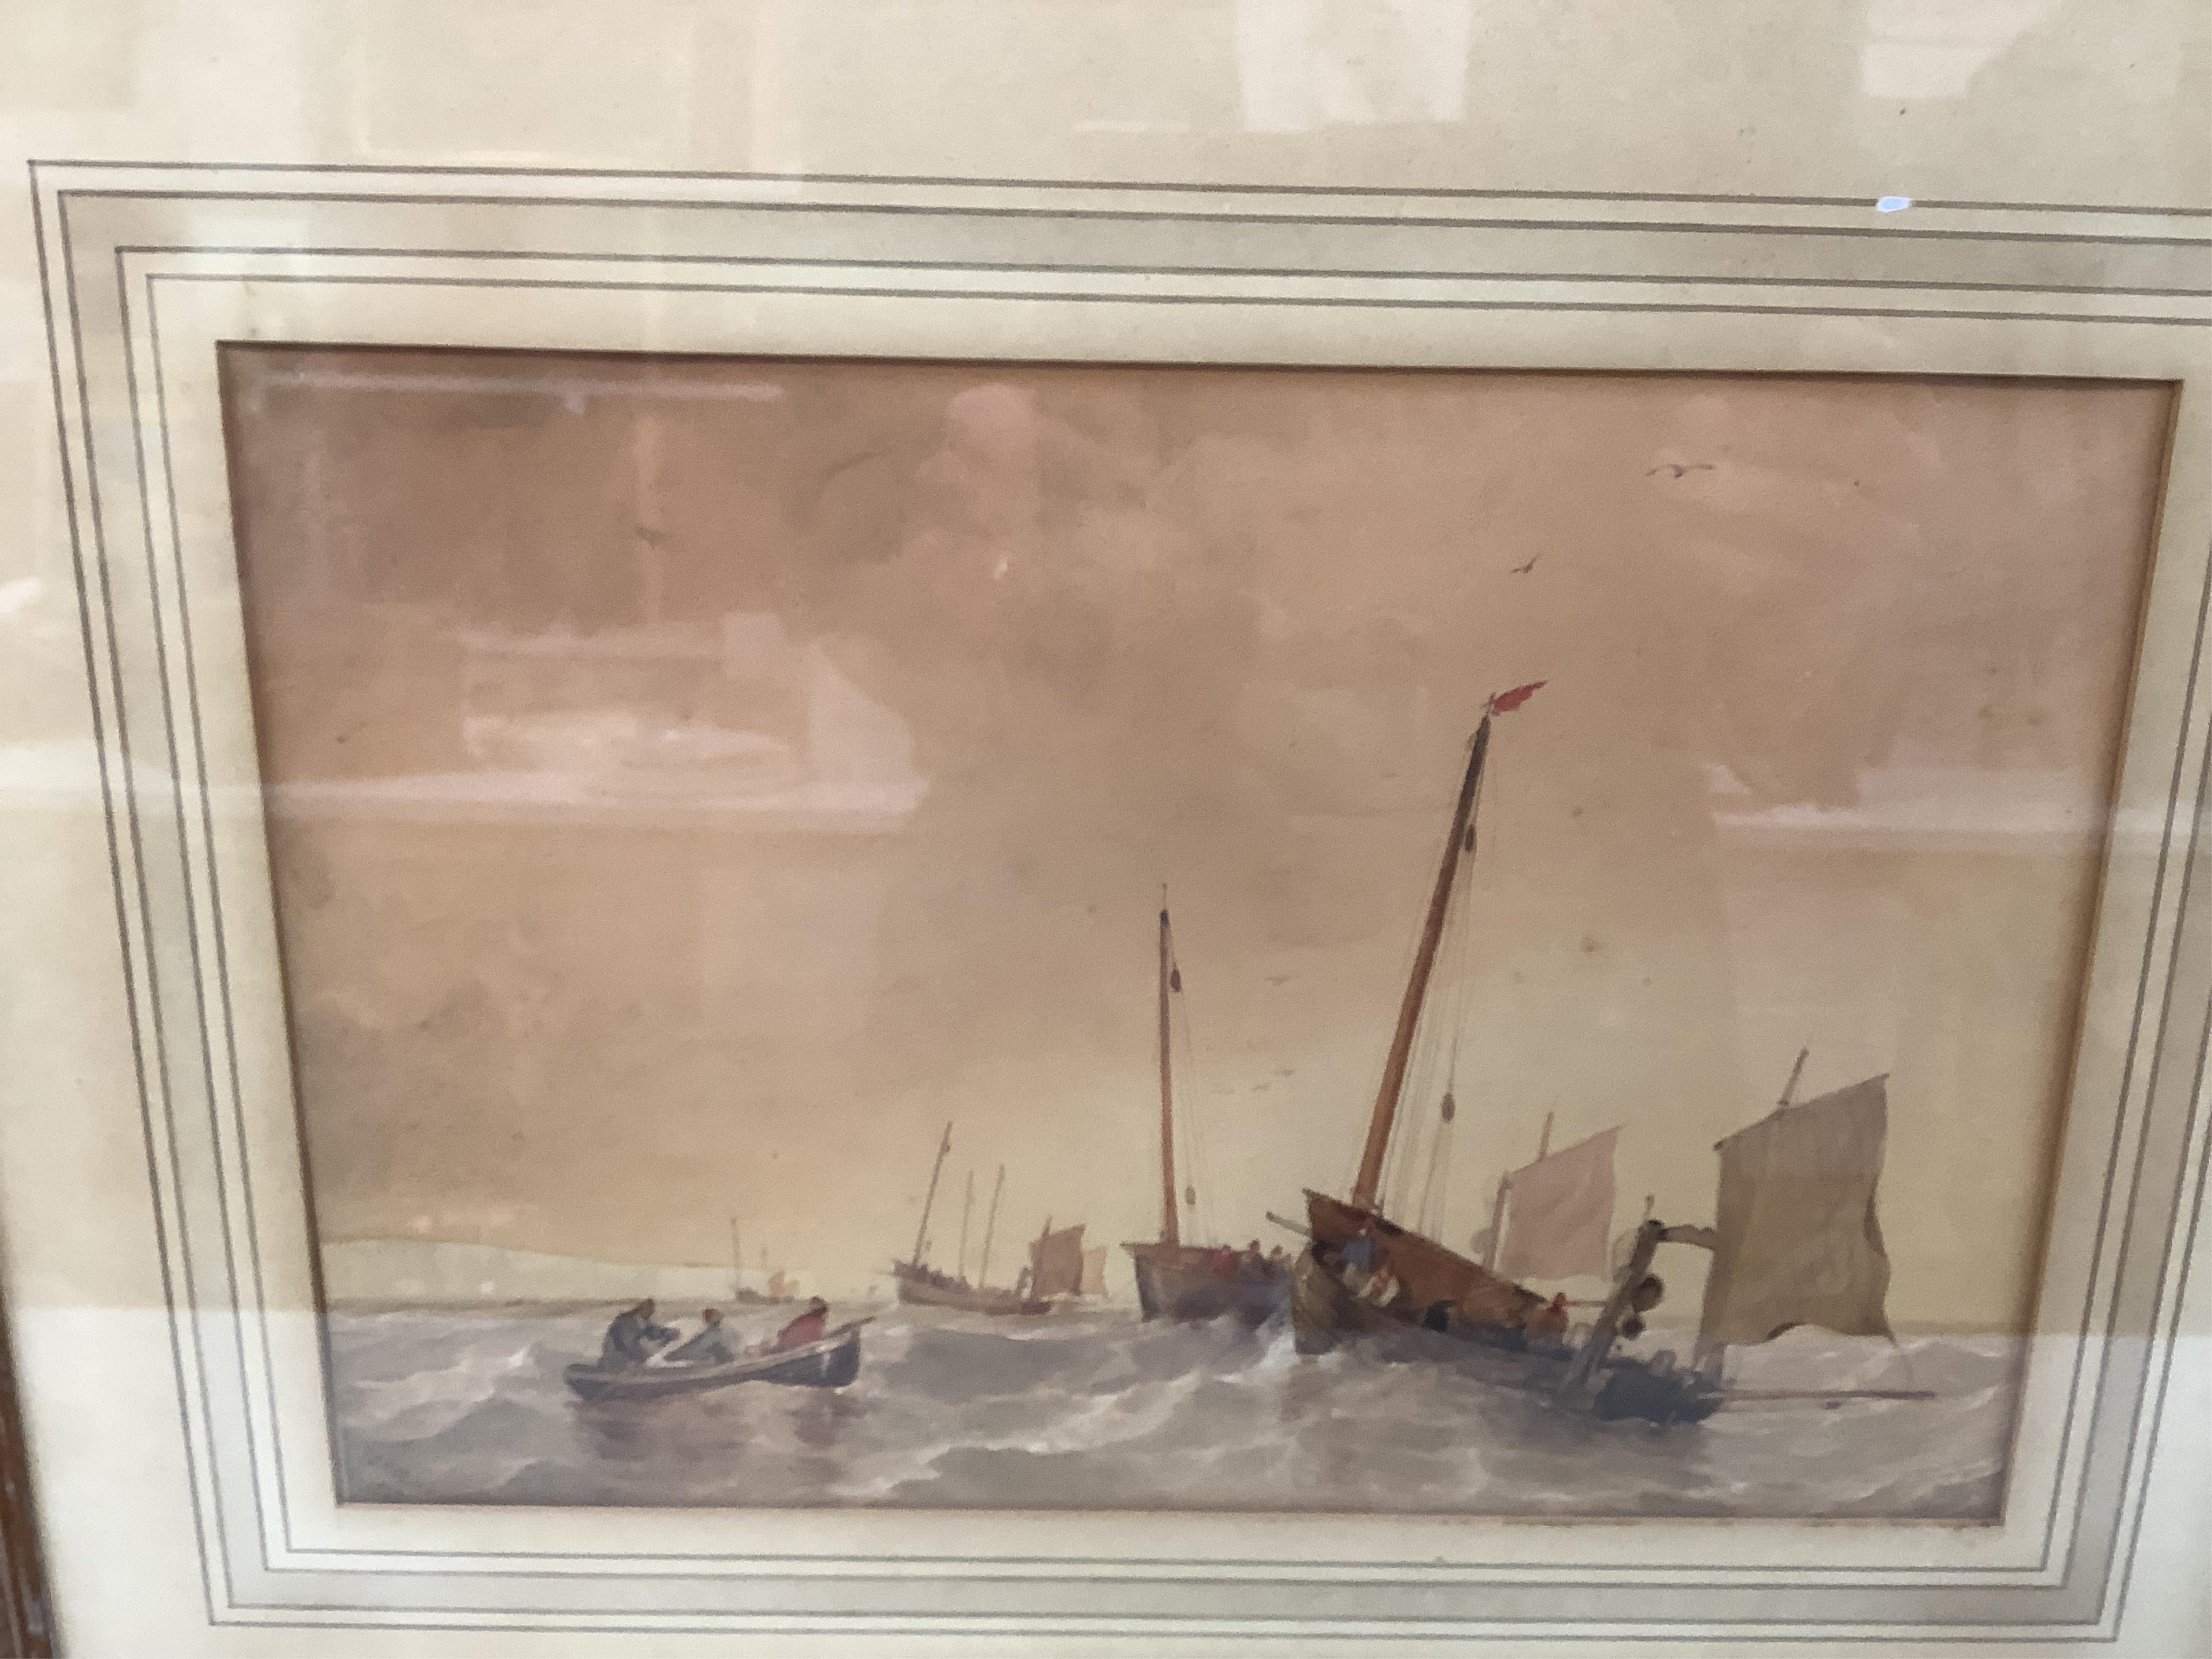 A collection of seven 19th century watercolour paintings to include, by - T.S Robins - ‘’Fishing boats in a choppy sea, signed; C.F. Buckley, 'Dove Dale, Derbyshire’, signed; Hercules Brabazon Brabazon, 'Fishing boats at